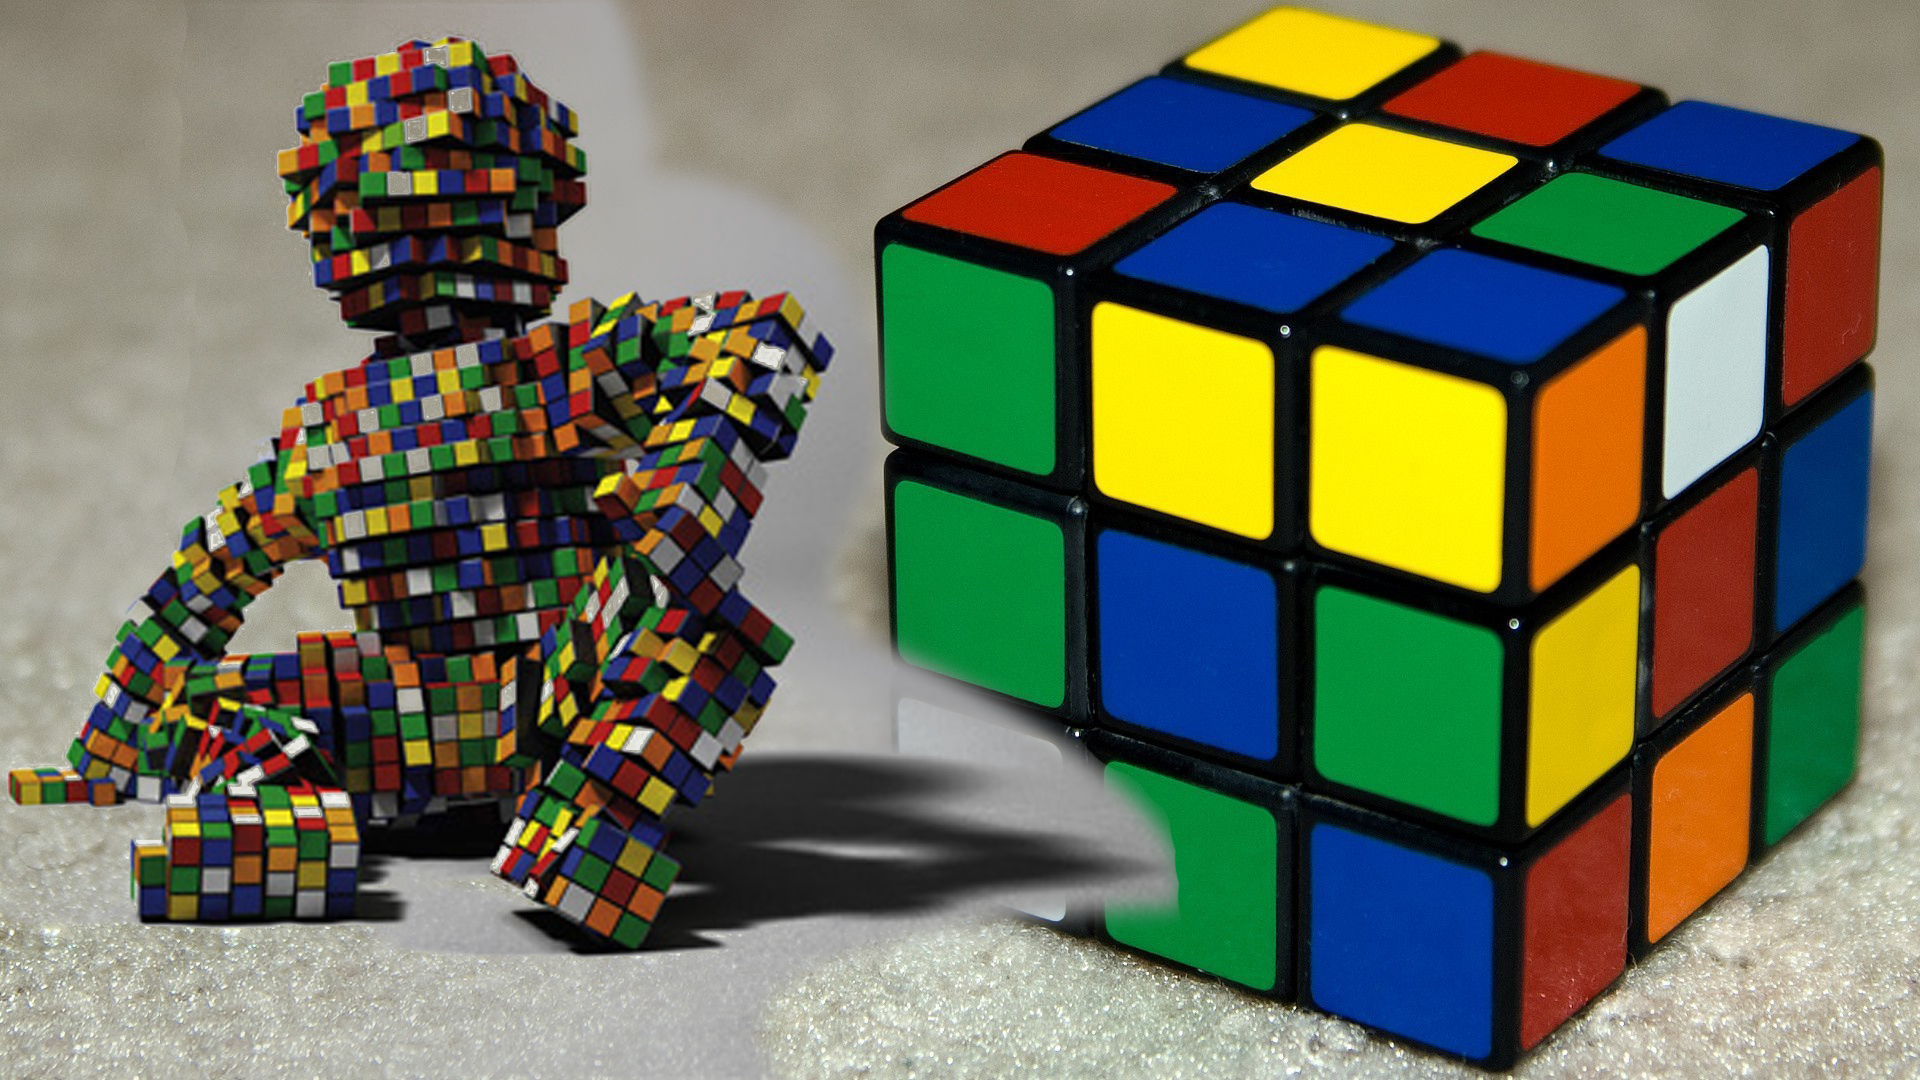 Rubik's Cube is a 3-D combination puzzle invented in 1974 by Hungarian sculptor and professor of architecture Ernő Rubik. Originally called the Magic Cube, the puzzle was licensed by Rubik to be sold by Ideal Toy Corp. in 1980